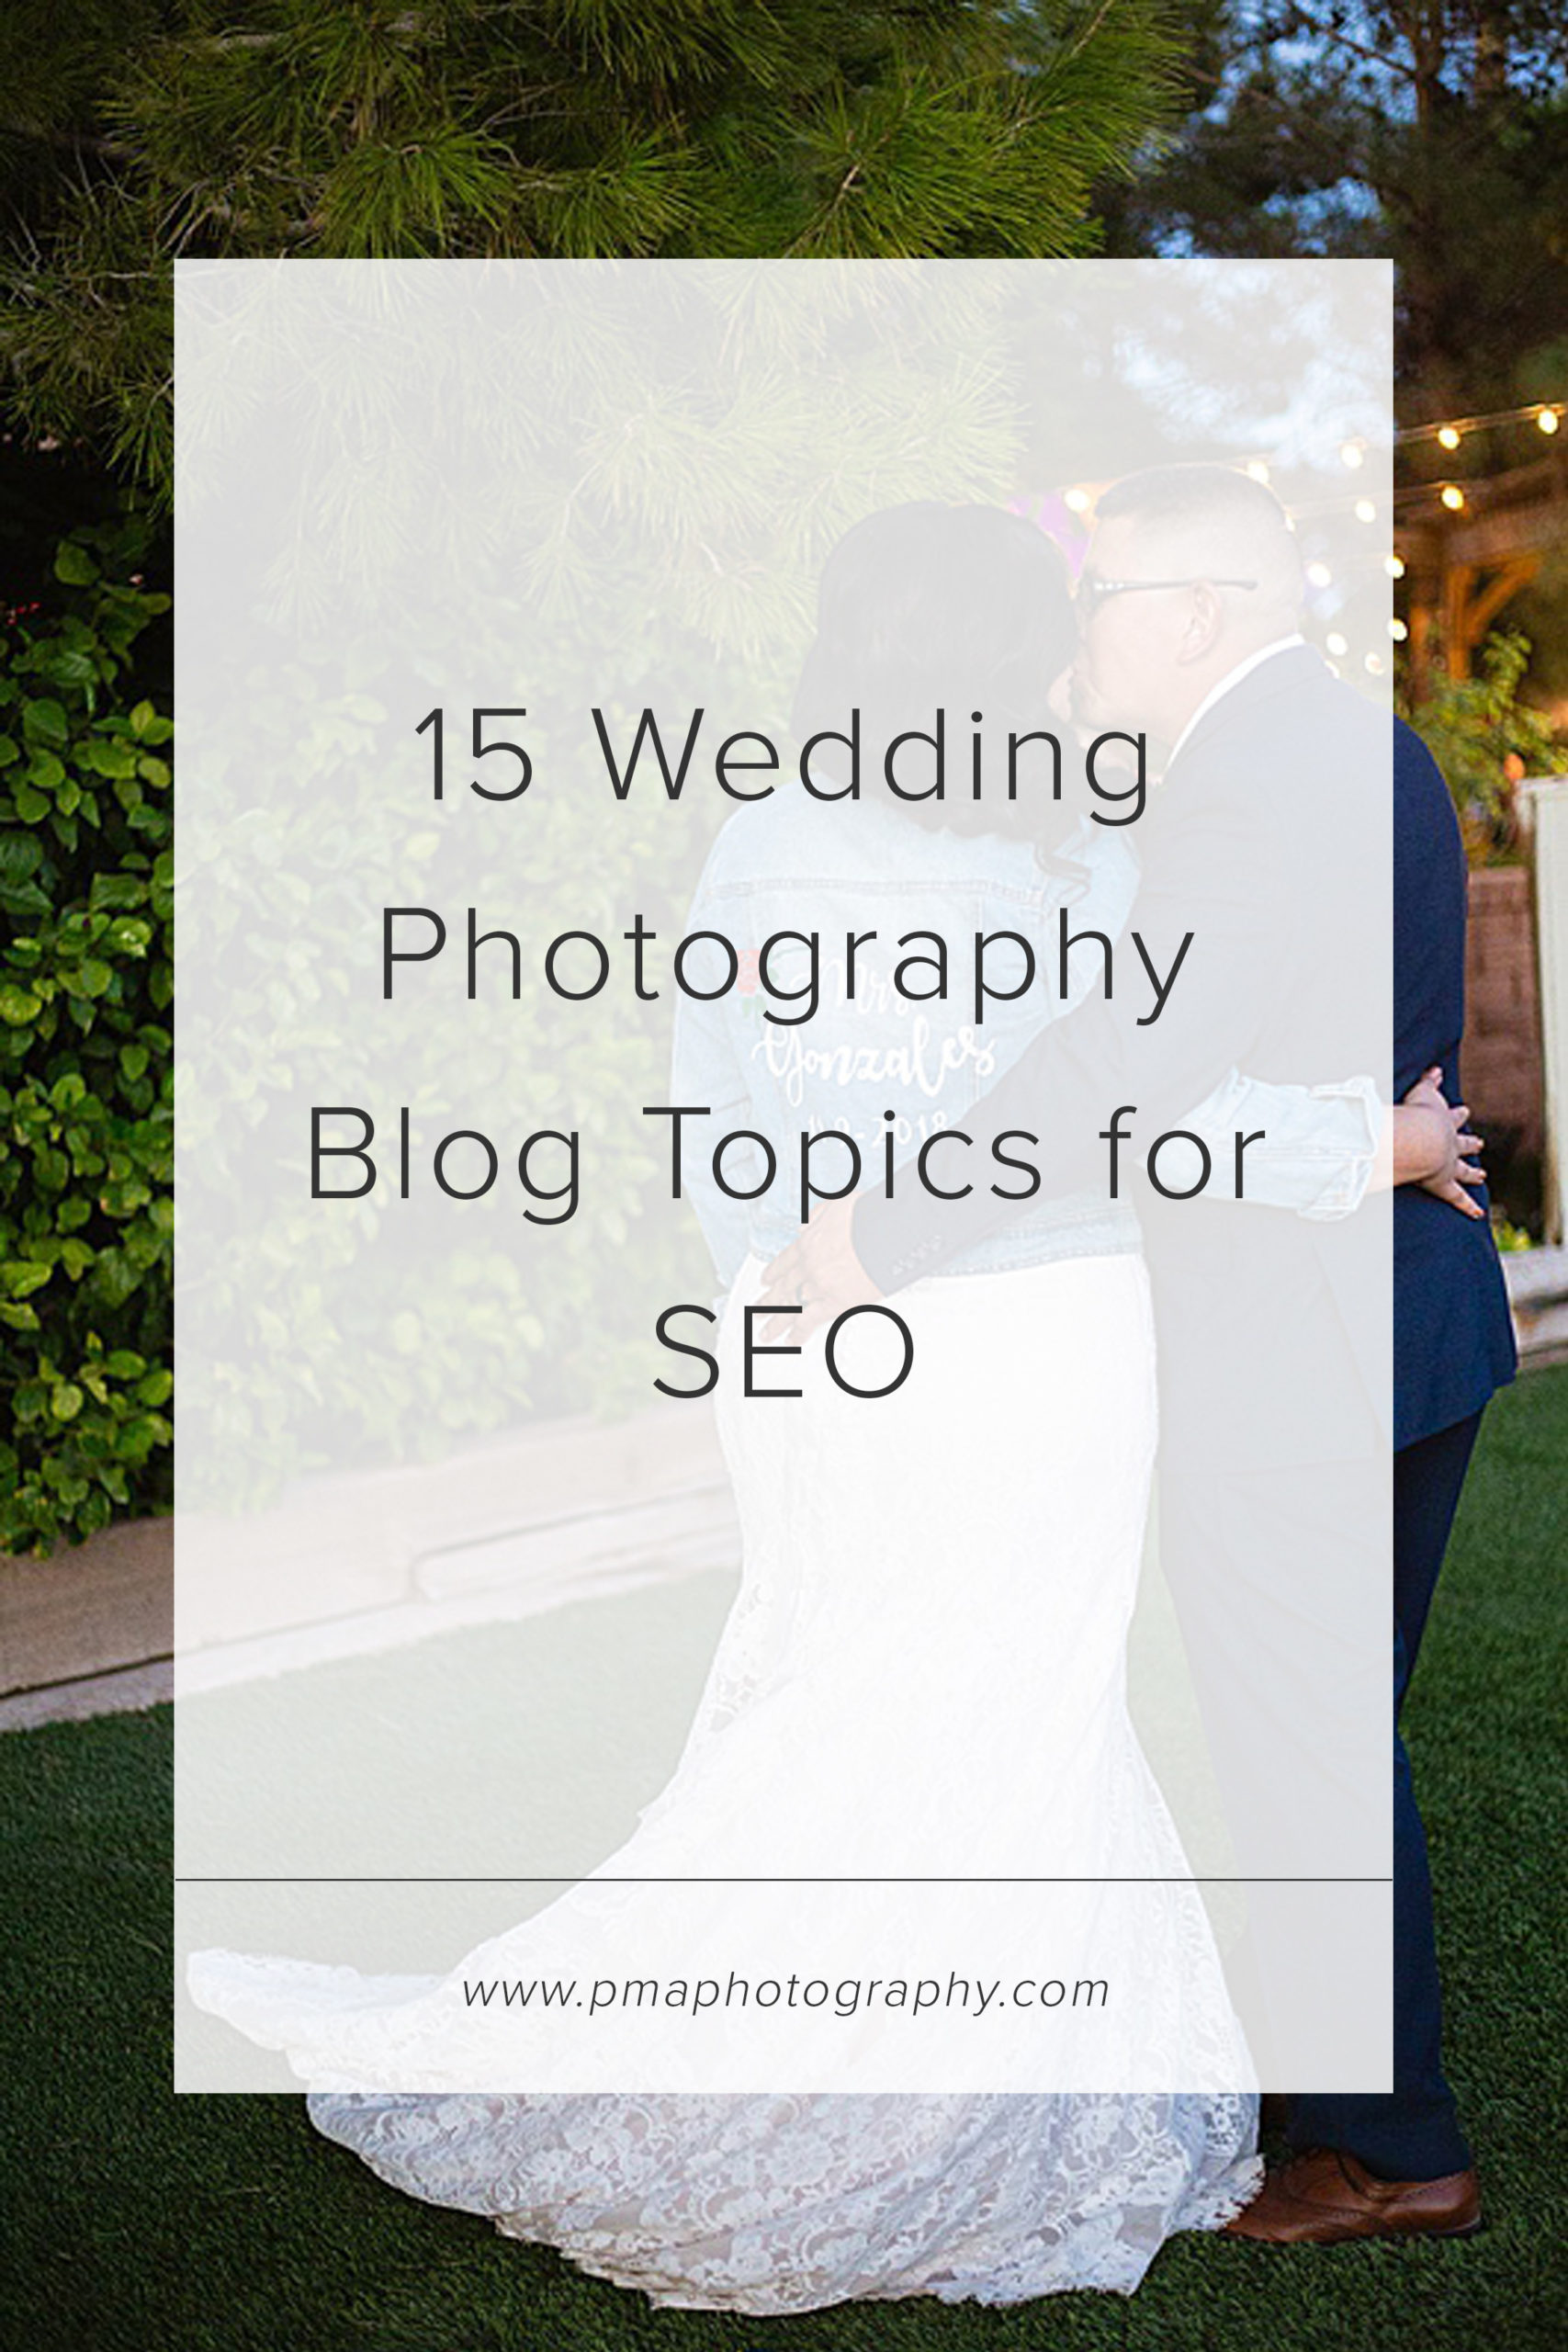 15 wedding photography by topics for SEO ranking.